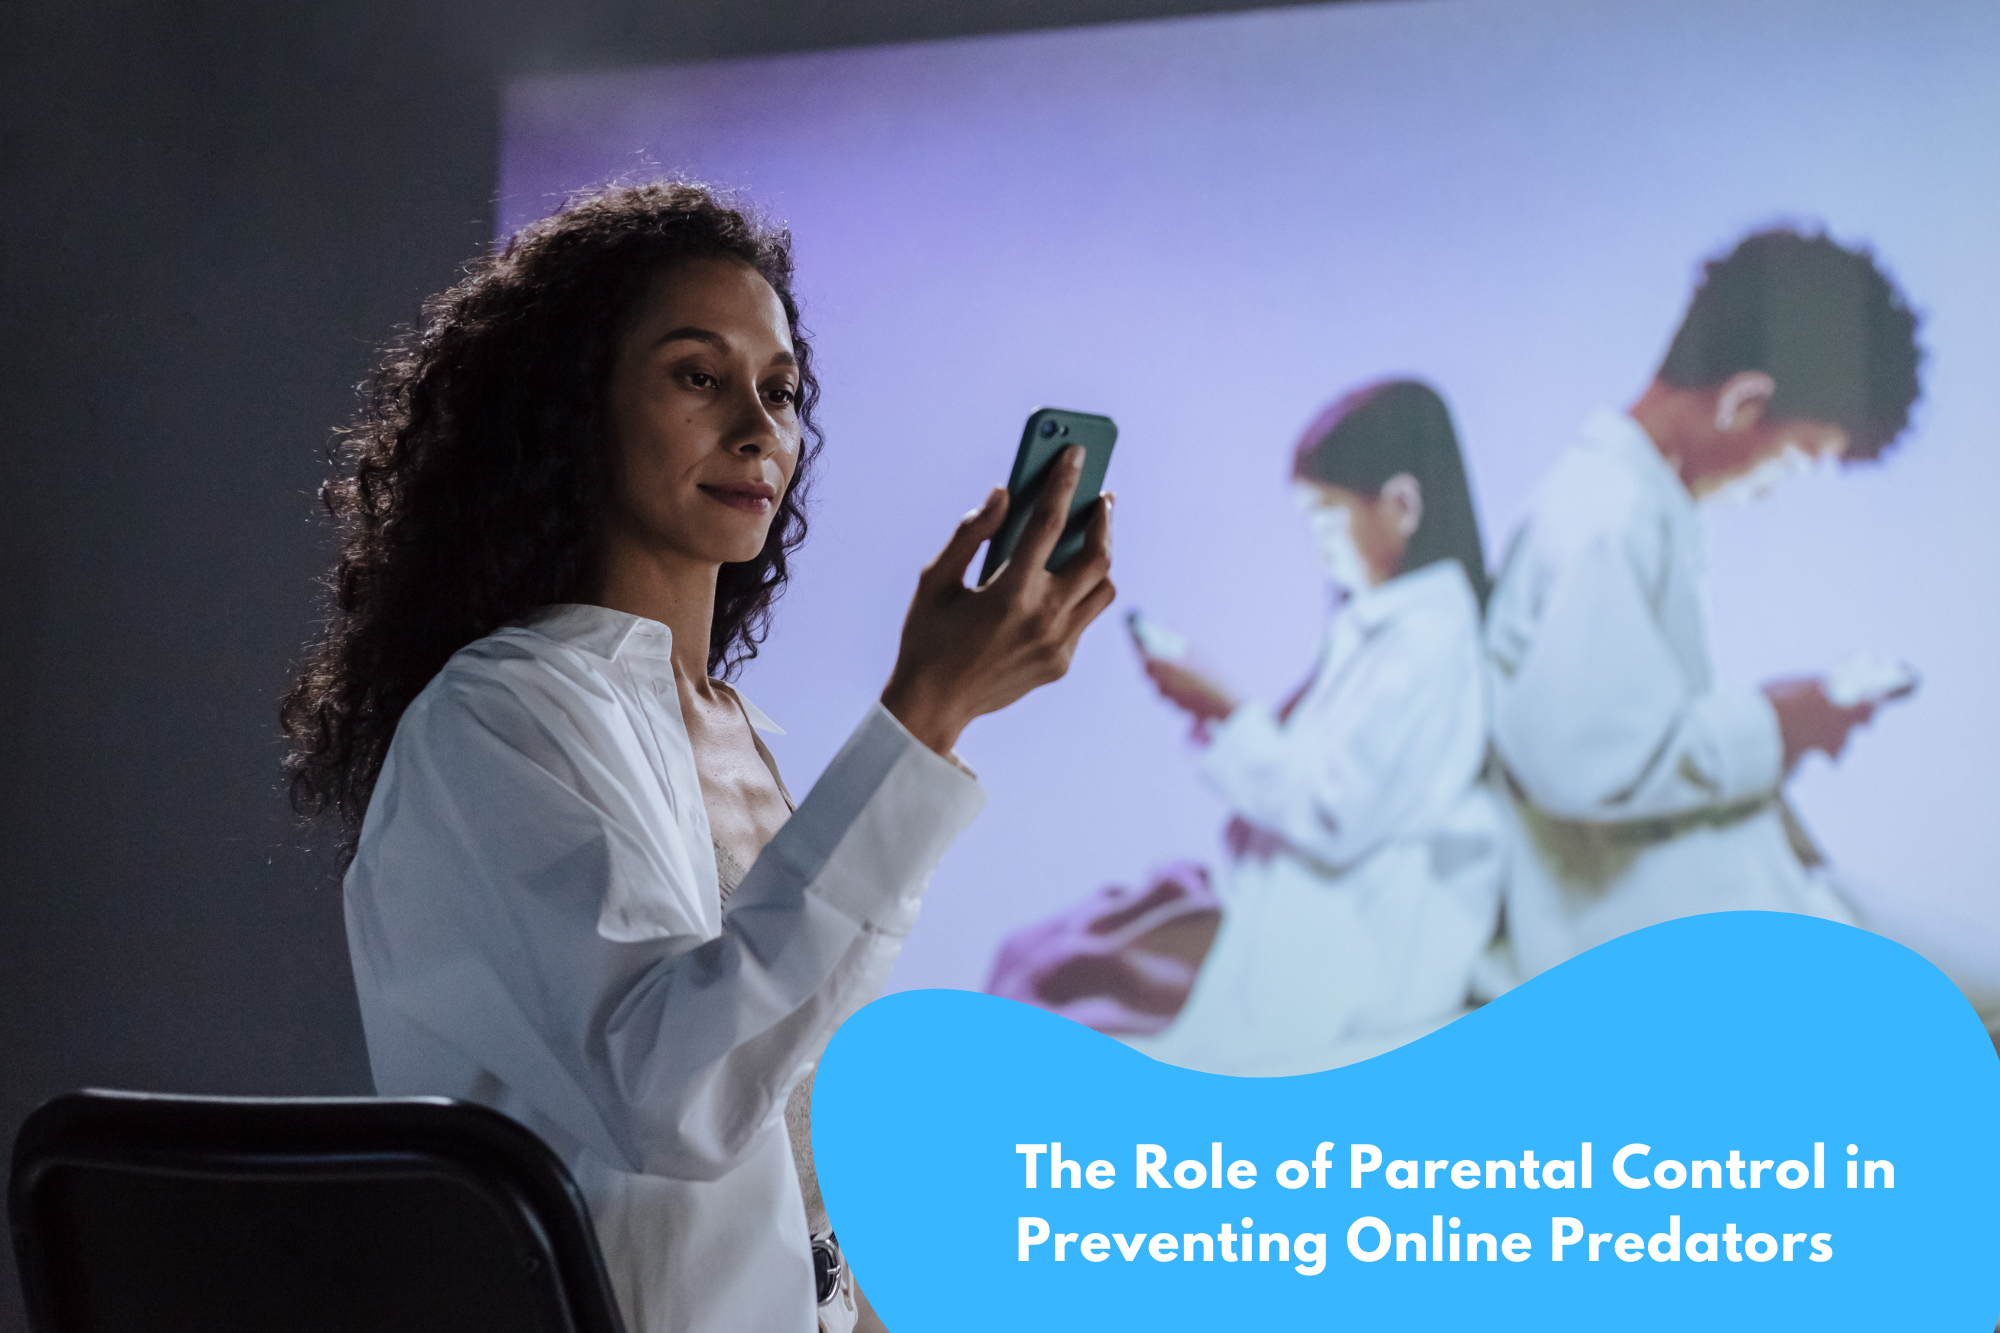 The Role of Parental Control in Preventing Online Predators